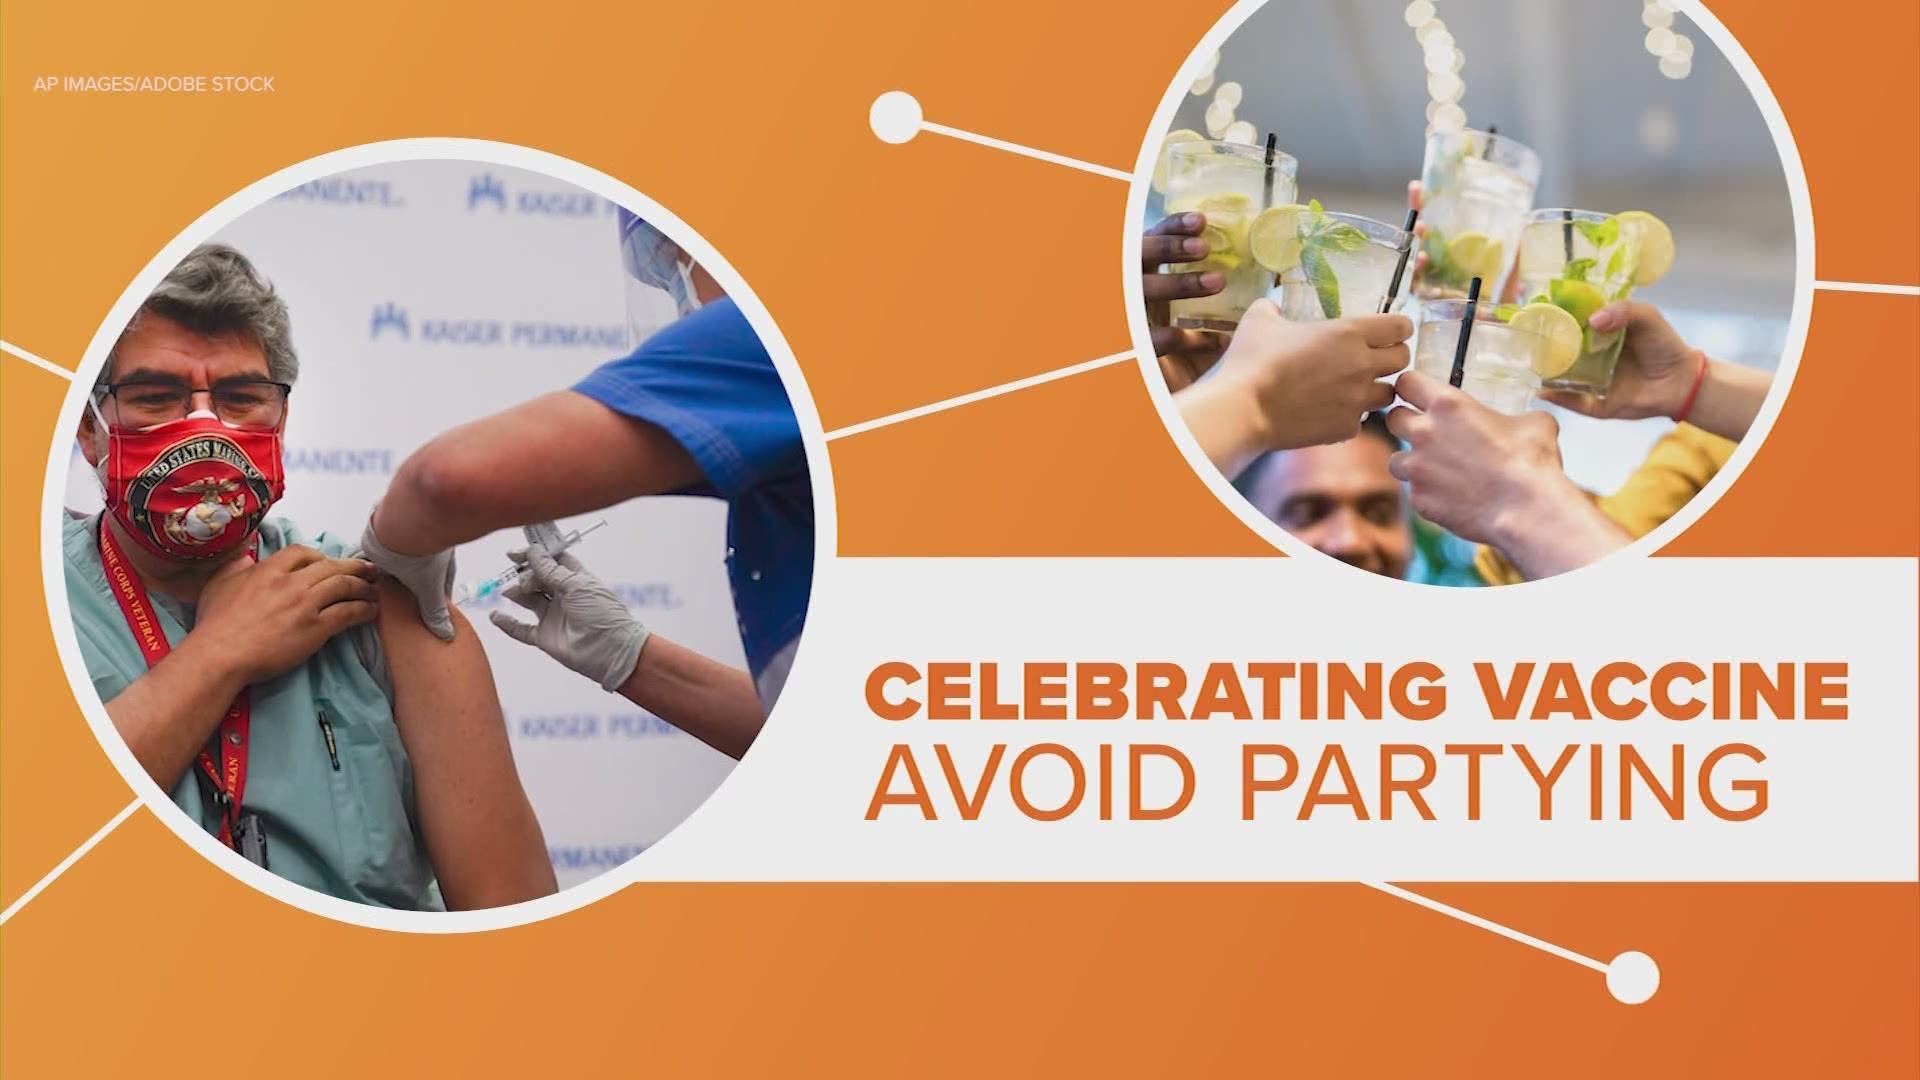 If you plan on celebrating getting your coronavirus vaccination, you may want to avoid partying too hard. Let's connect the dots.